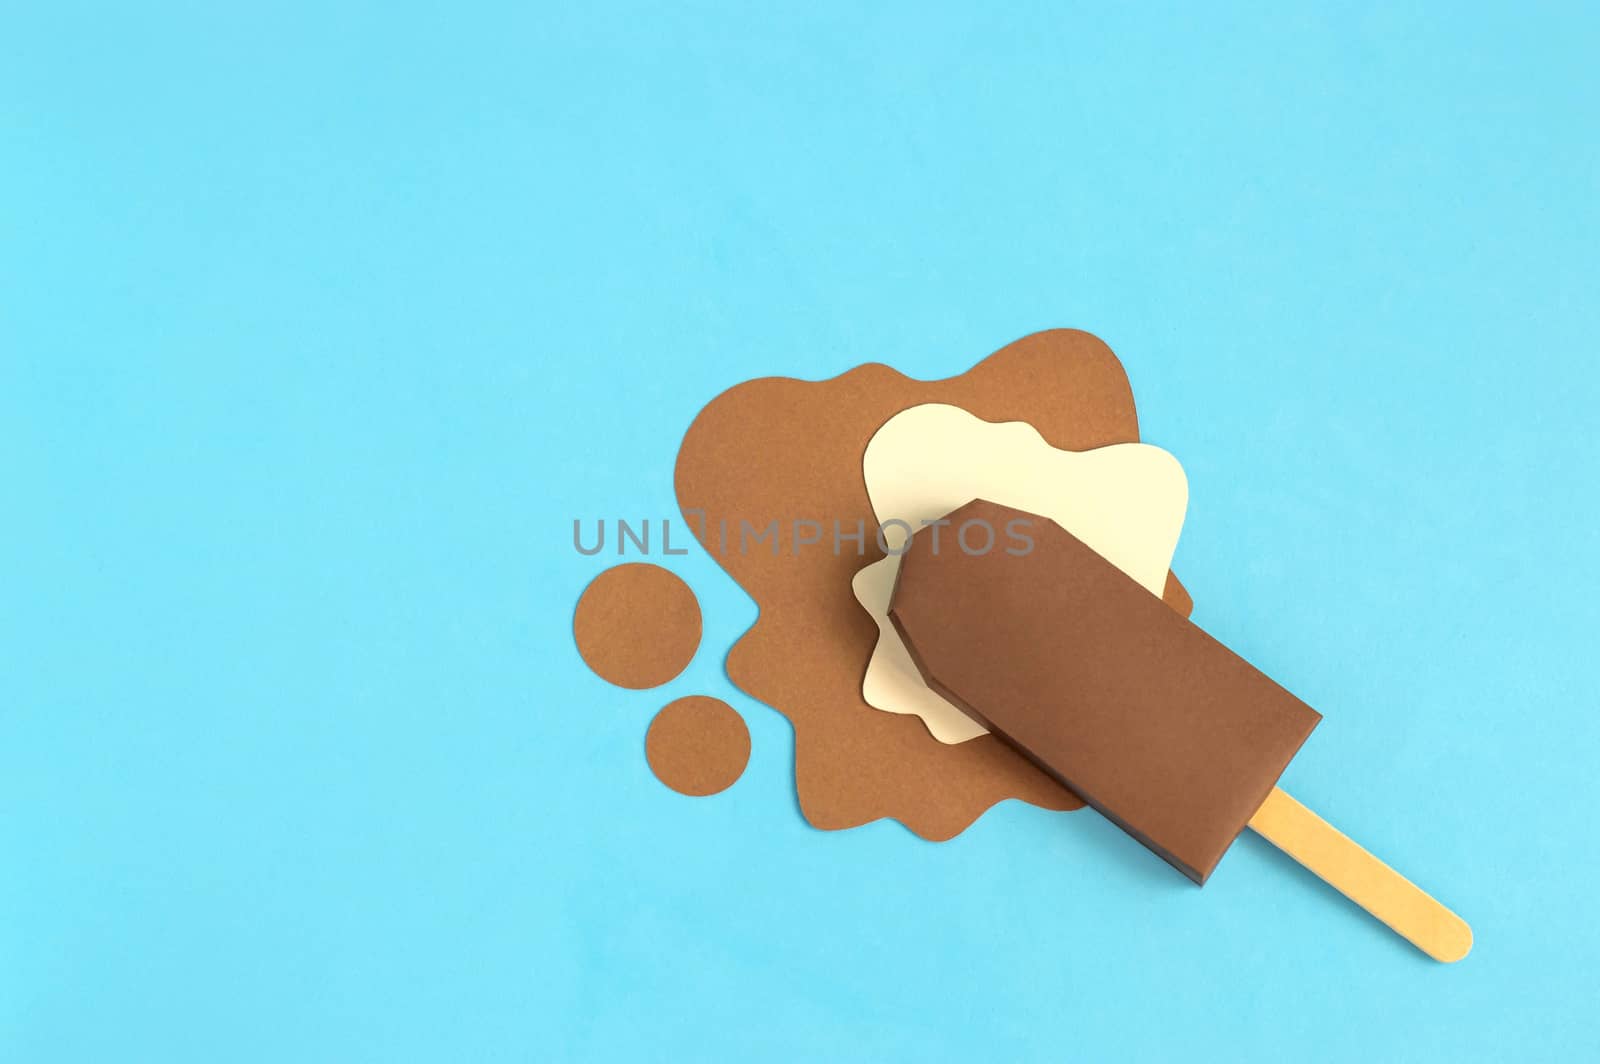 Chocolate popsicle made of paper. Real volumetric handmade paper objects. Paper art and craft